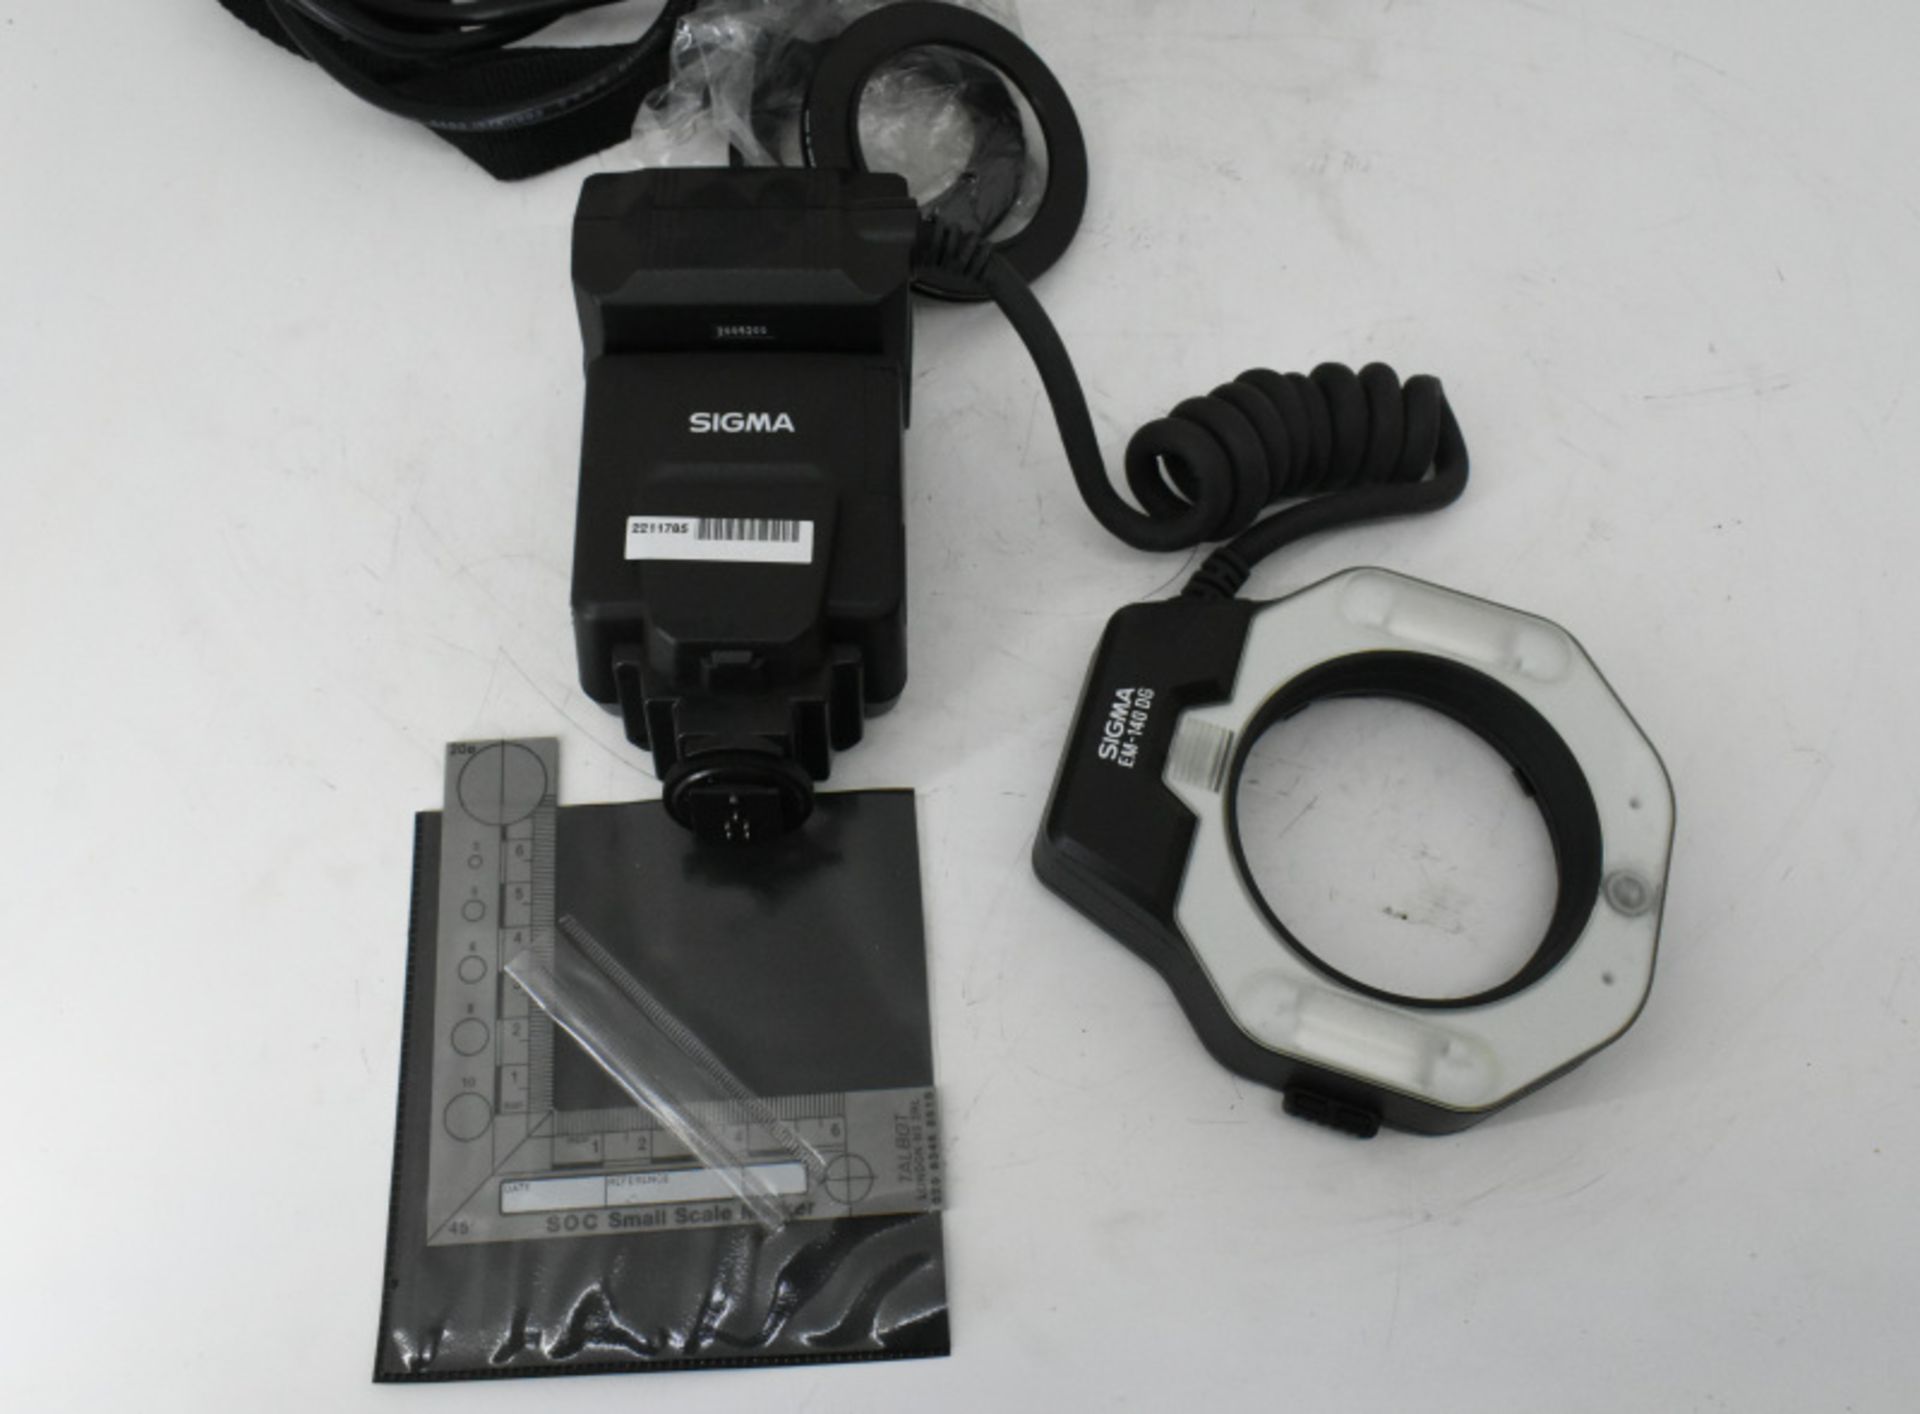 Sigma EM-140 DG ring flash with case and accessories - Image 2 of 3